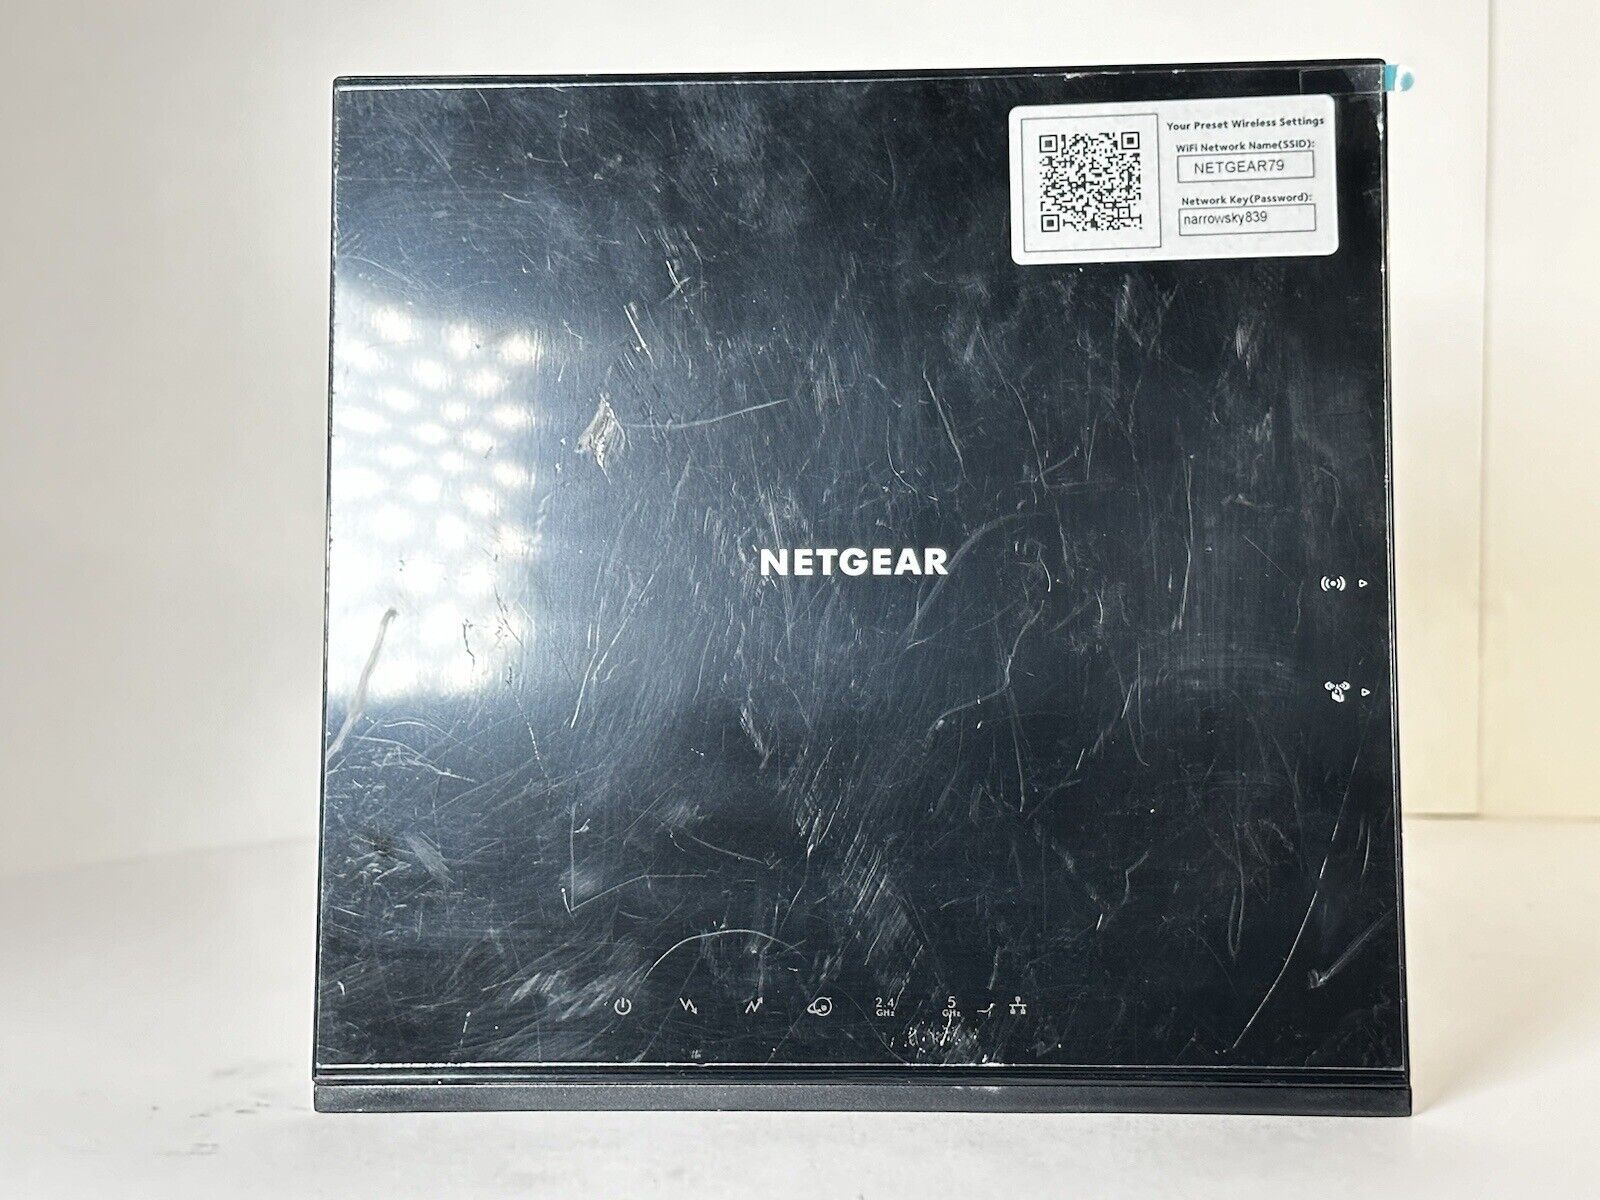 NETGEAR AC1600 Cable Modem Router C6250 802.11ac Dual Band Gig - MISSING ADAPTER